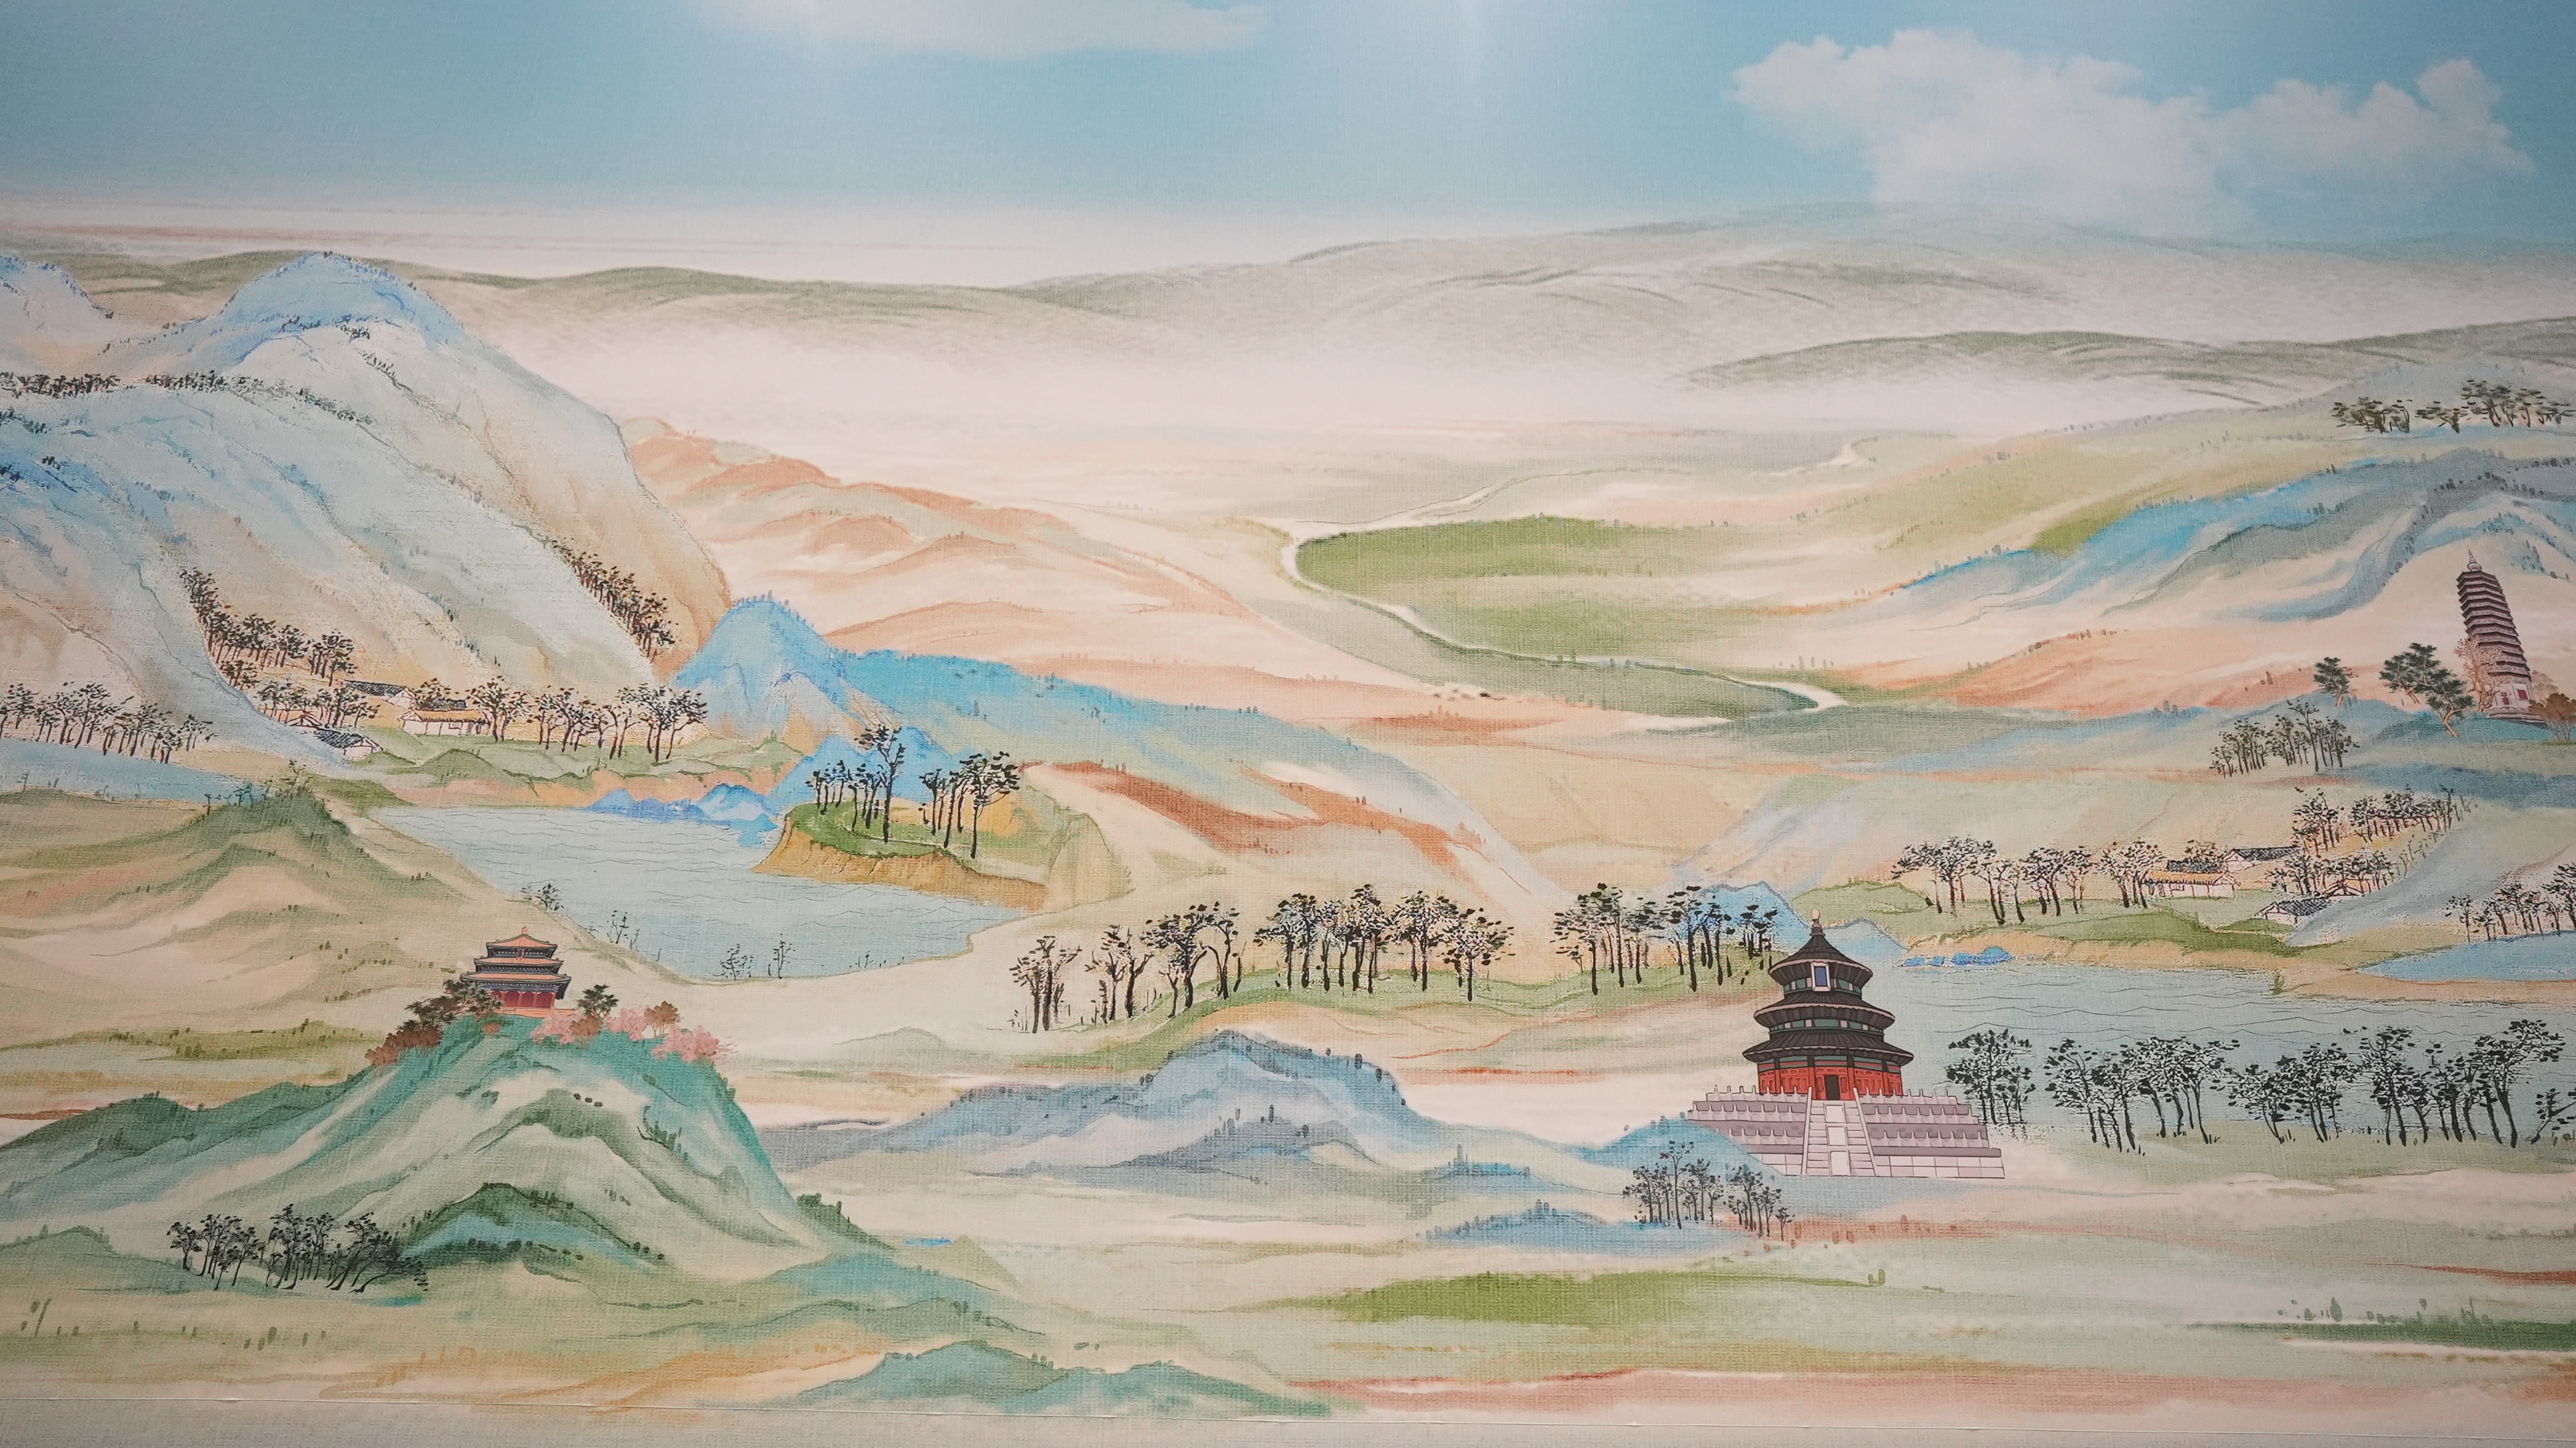 A wall painting featuring silk road cultural elements at the National Convention Center in Beijing, China, October 17, 2023. /CGTN